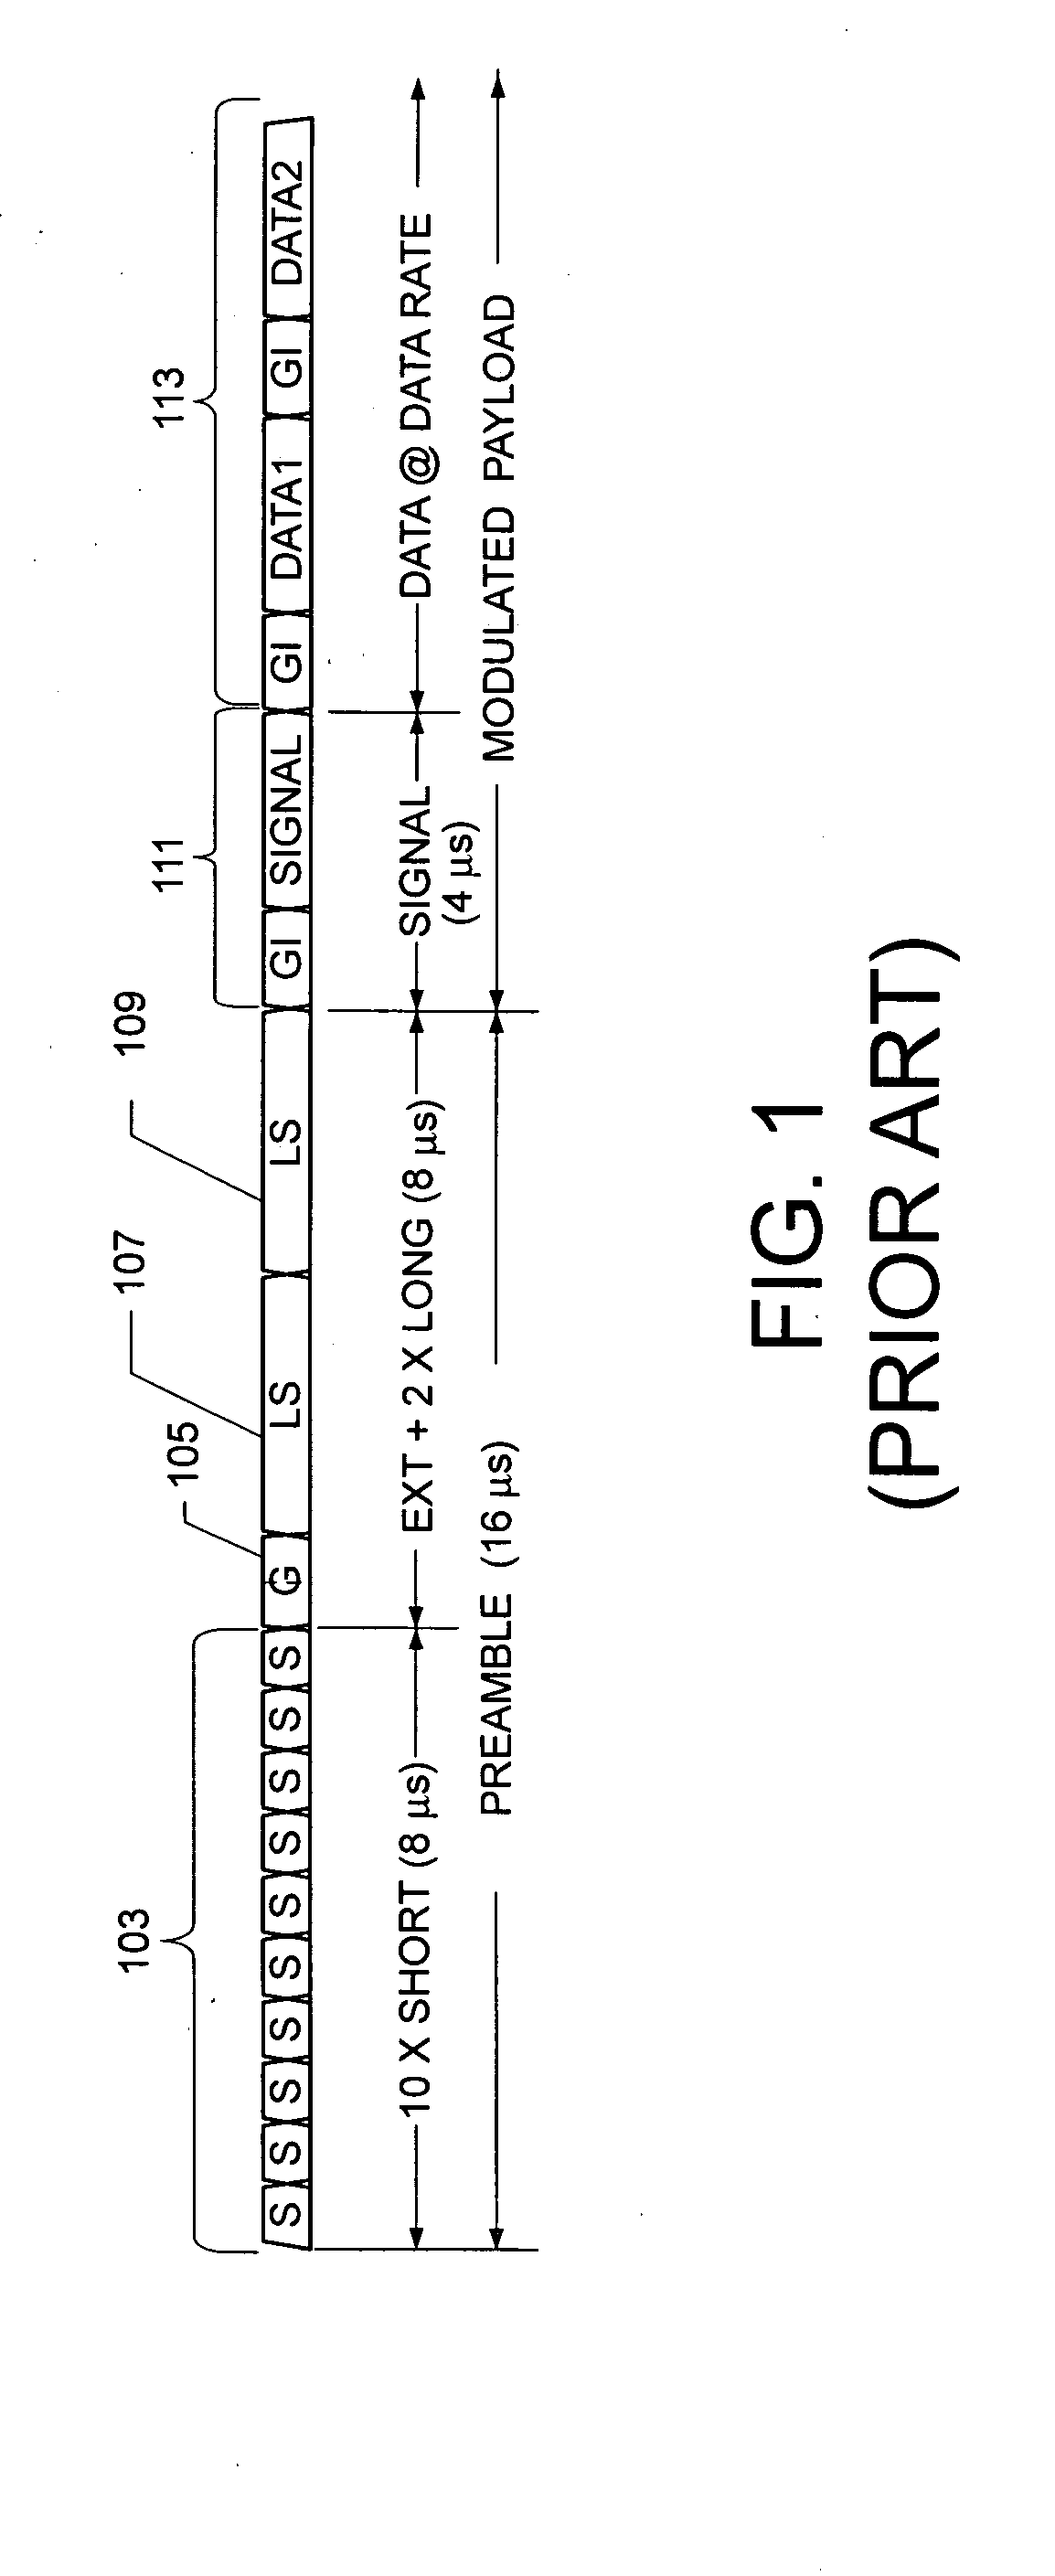 Method and apparatus for cell identification in wireless data networks